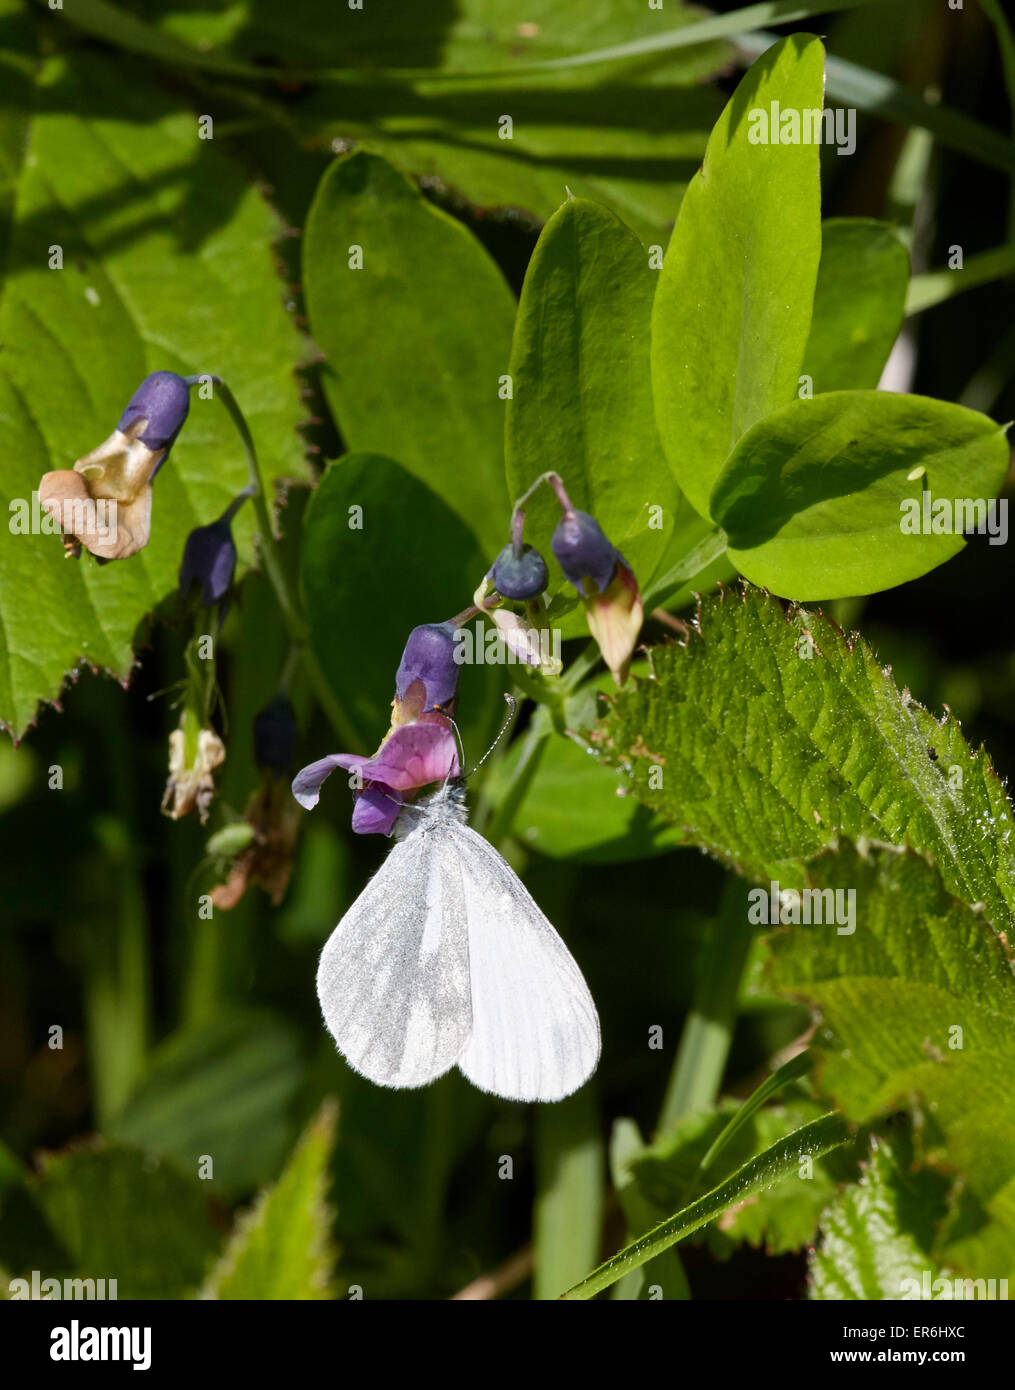 Wood White on Bitter Vetch flower with egg laid on leaf. Oaken Wood, Chiddingfold, Surrey, England. Stock Photo